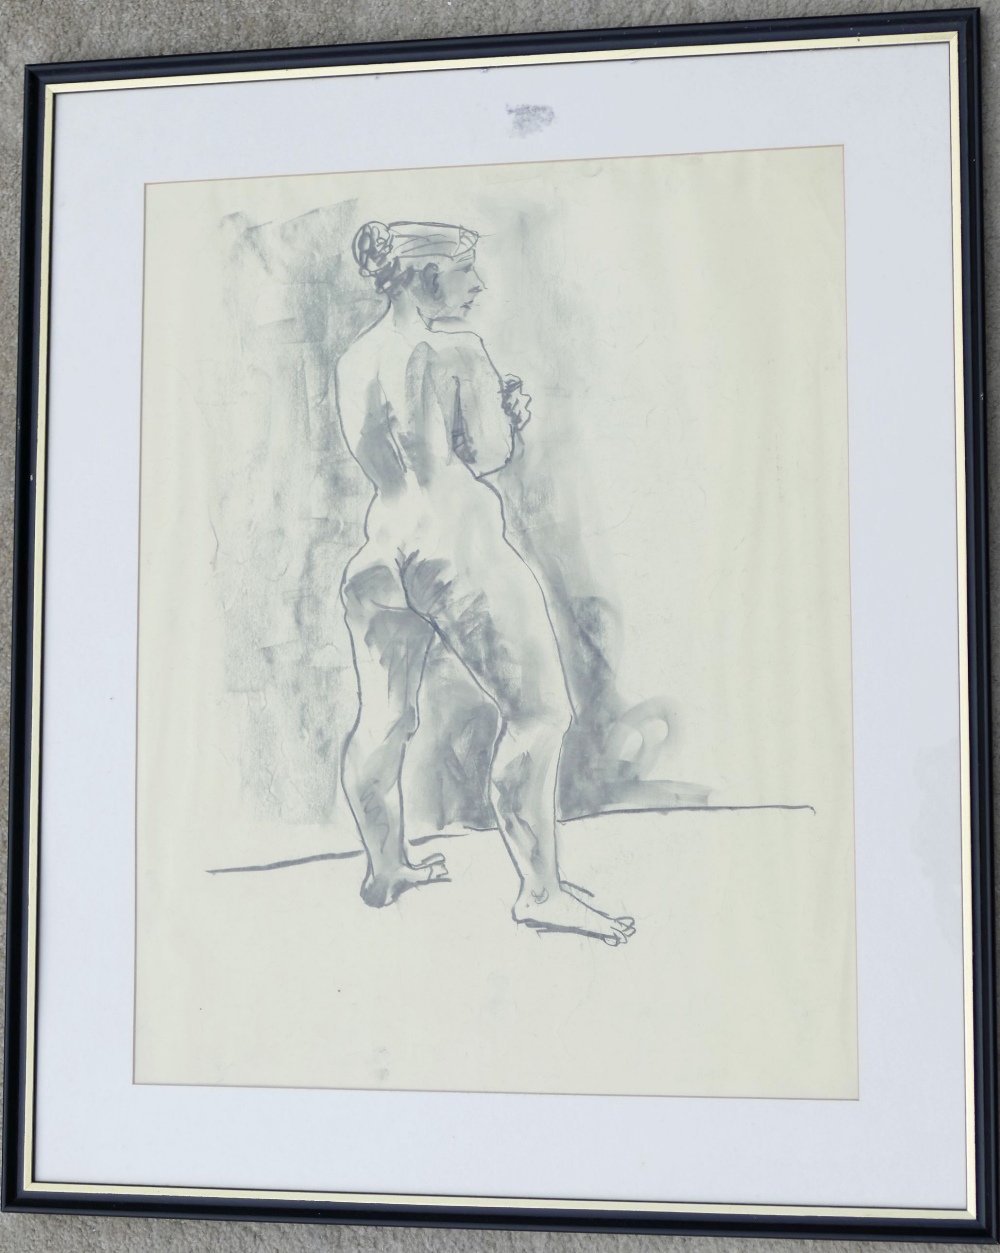 Hugo Dachinger (1908-1996 ), life model sketch of a woman standing facing away from the artist, - Image 2 of 3